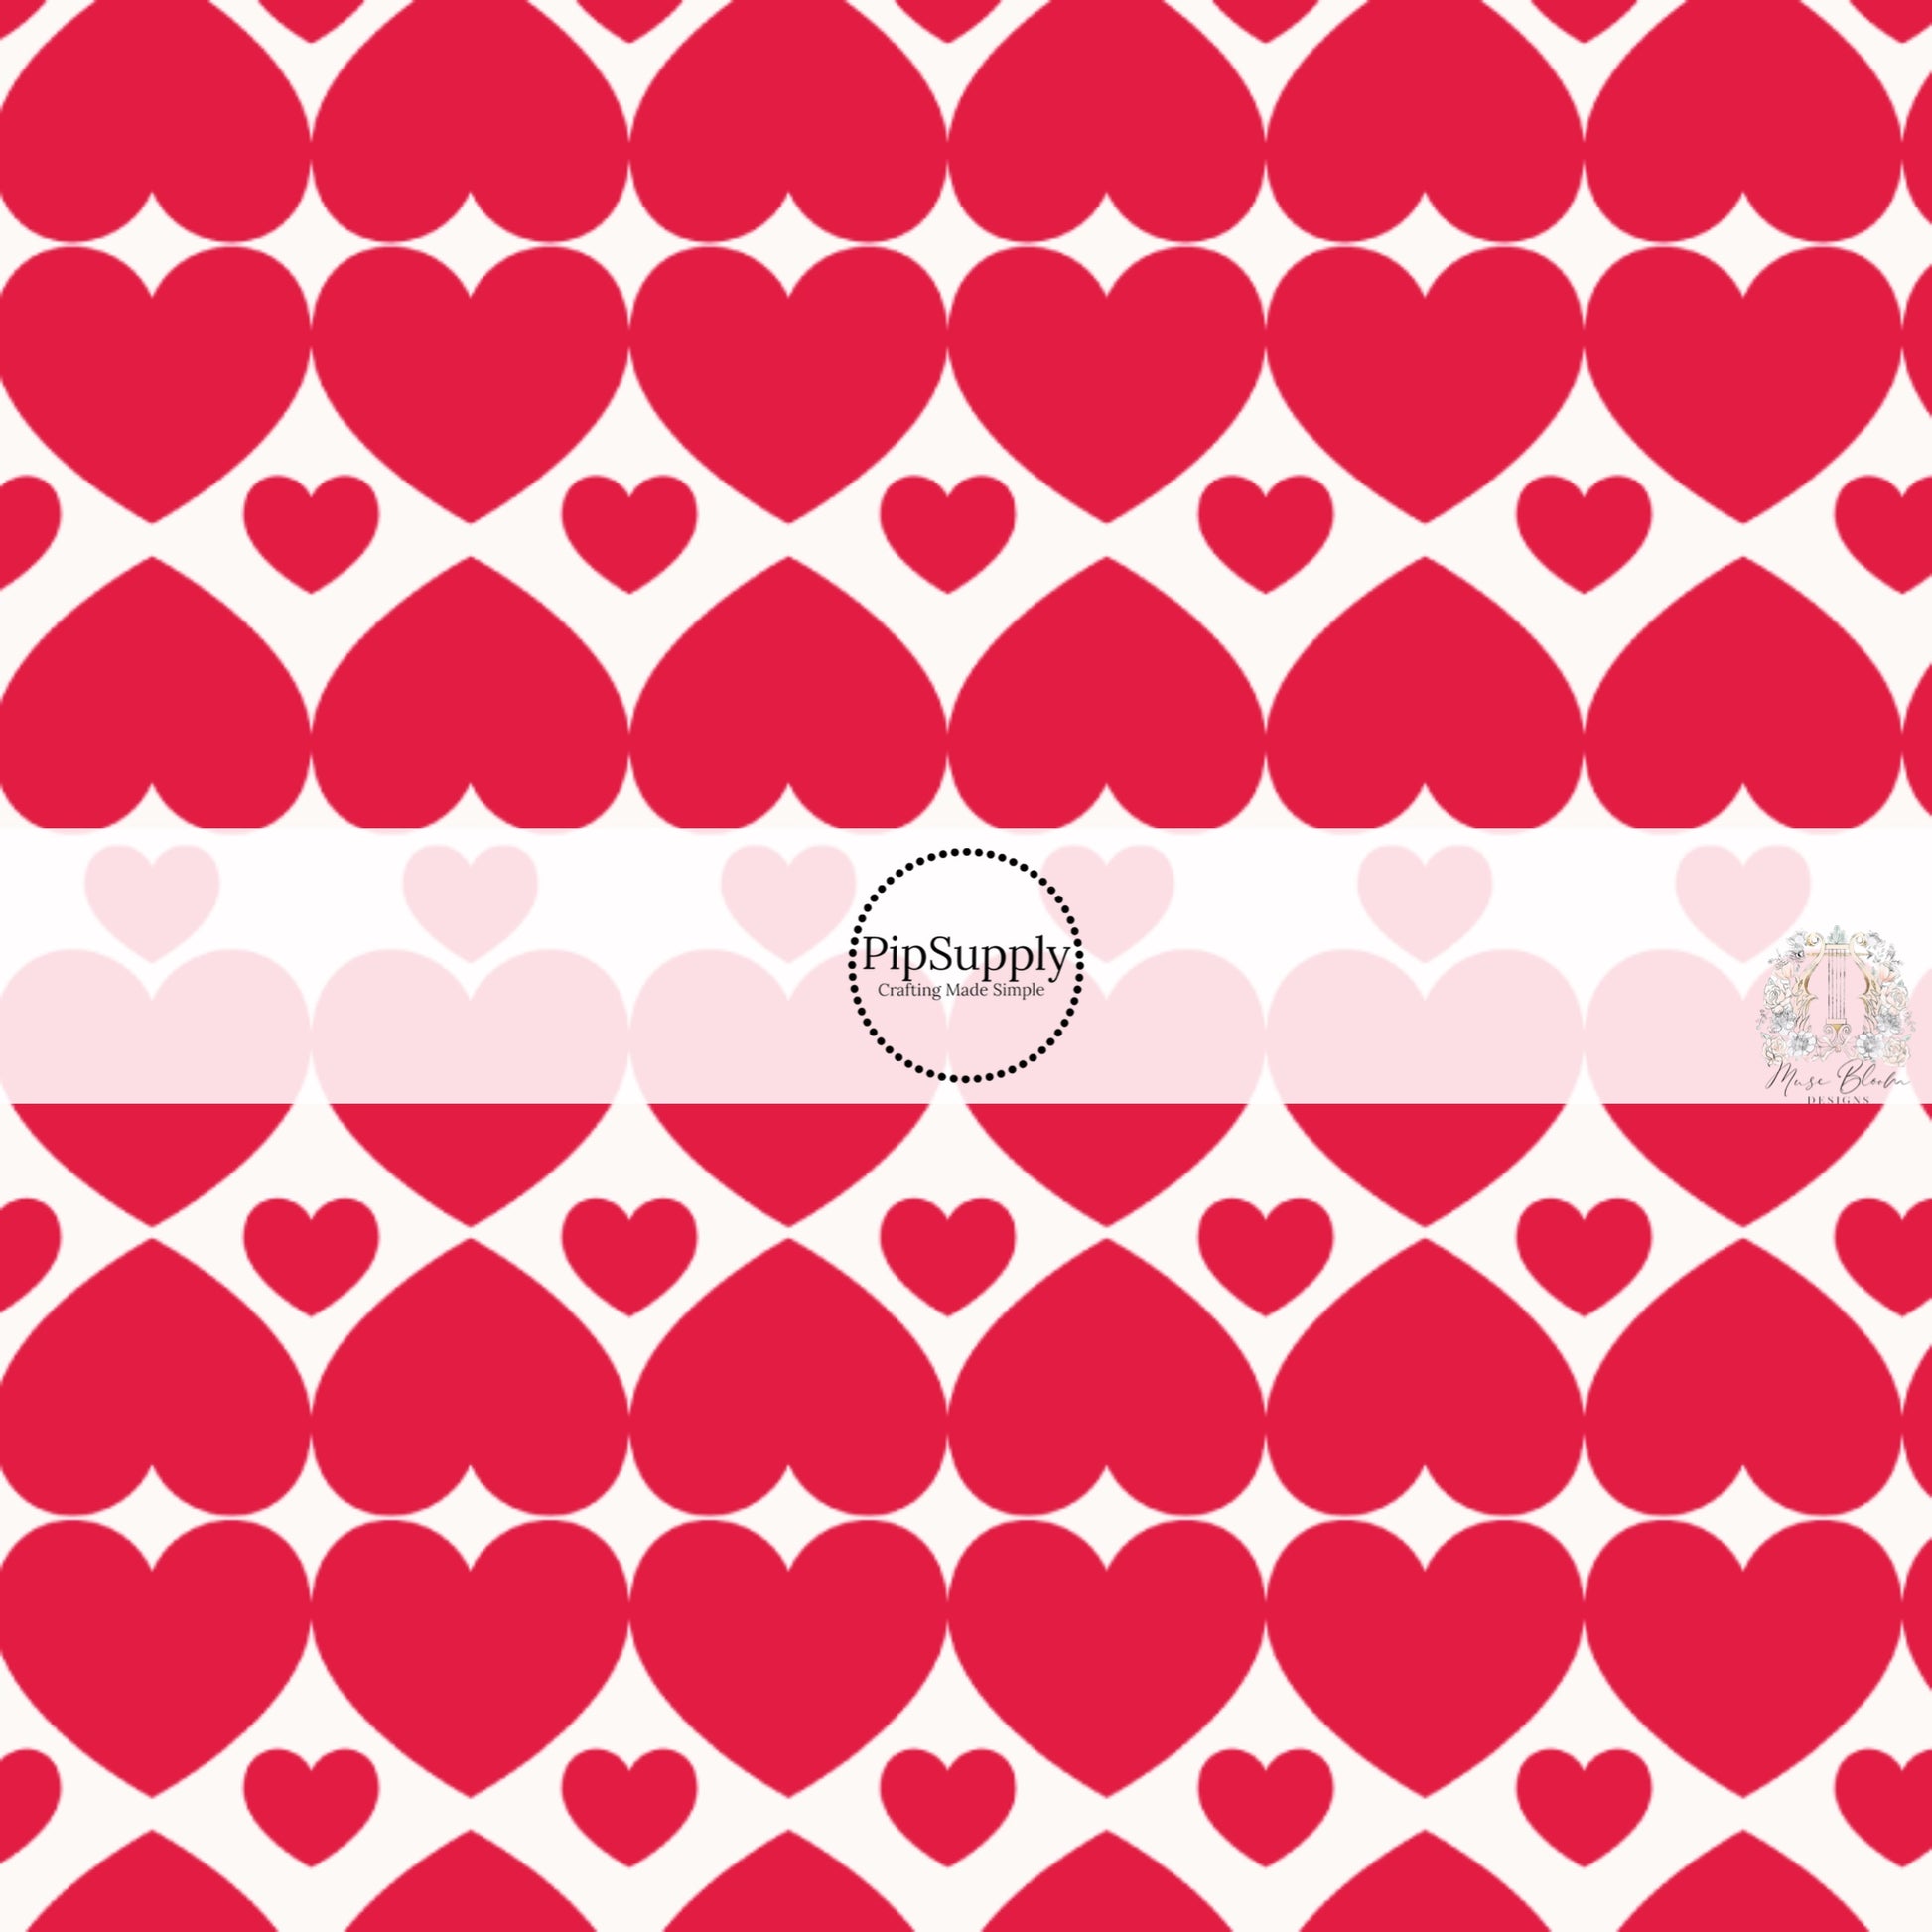 Little and big red hearts on white hair bow strips